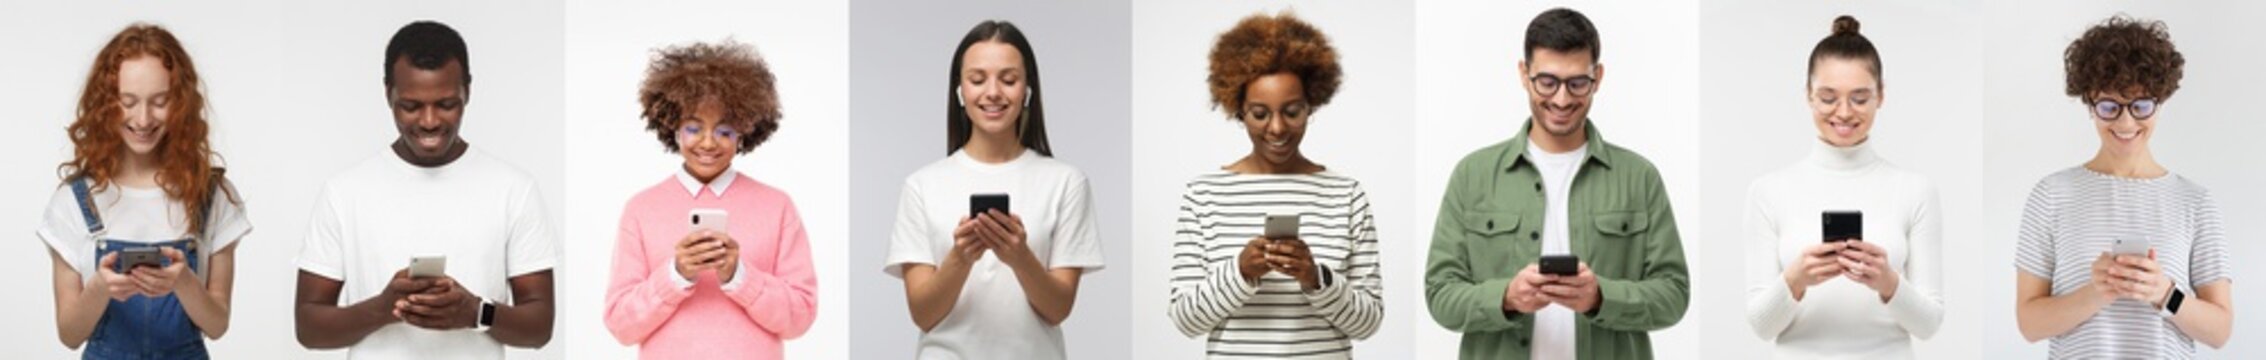 People phone collage. Set of smiling diverse men and women texting with smartphones